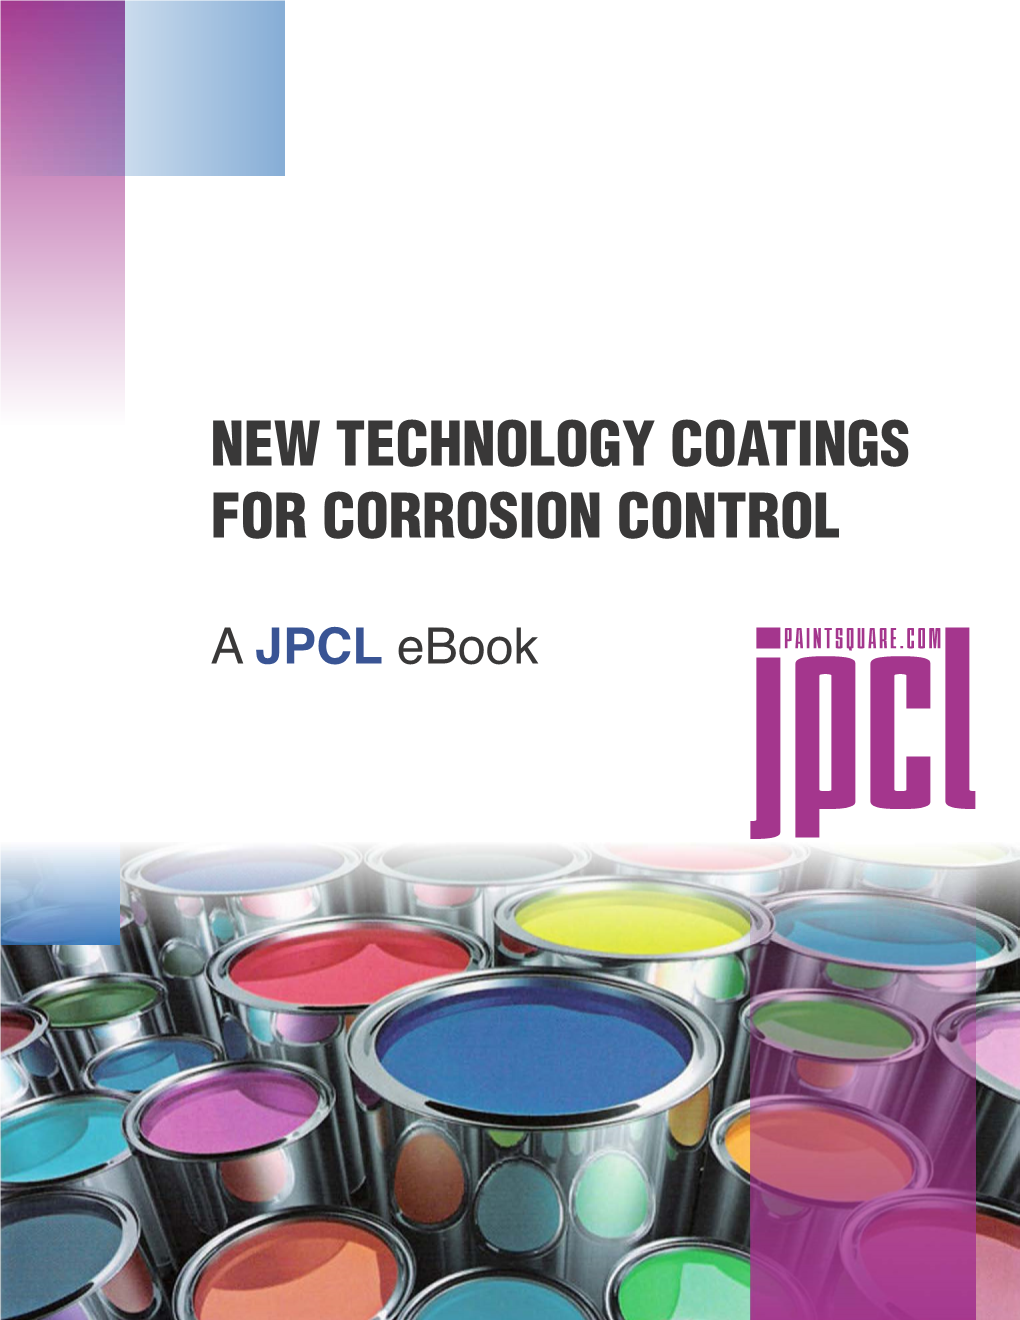 New Technology Coatings for Corrosion Control